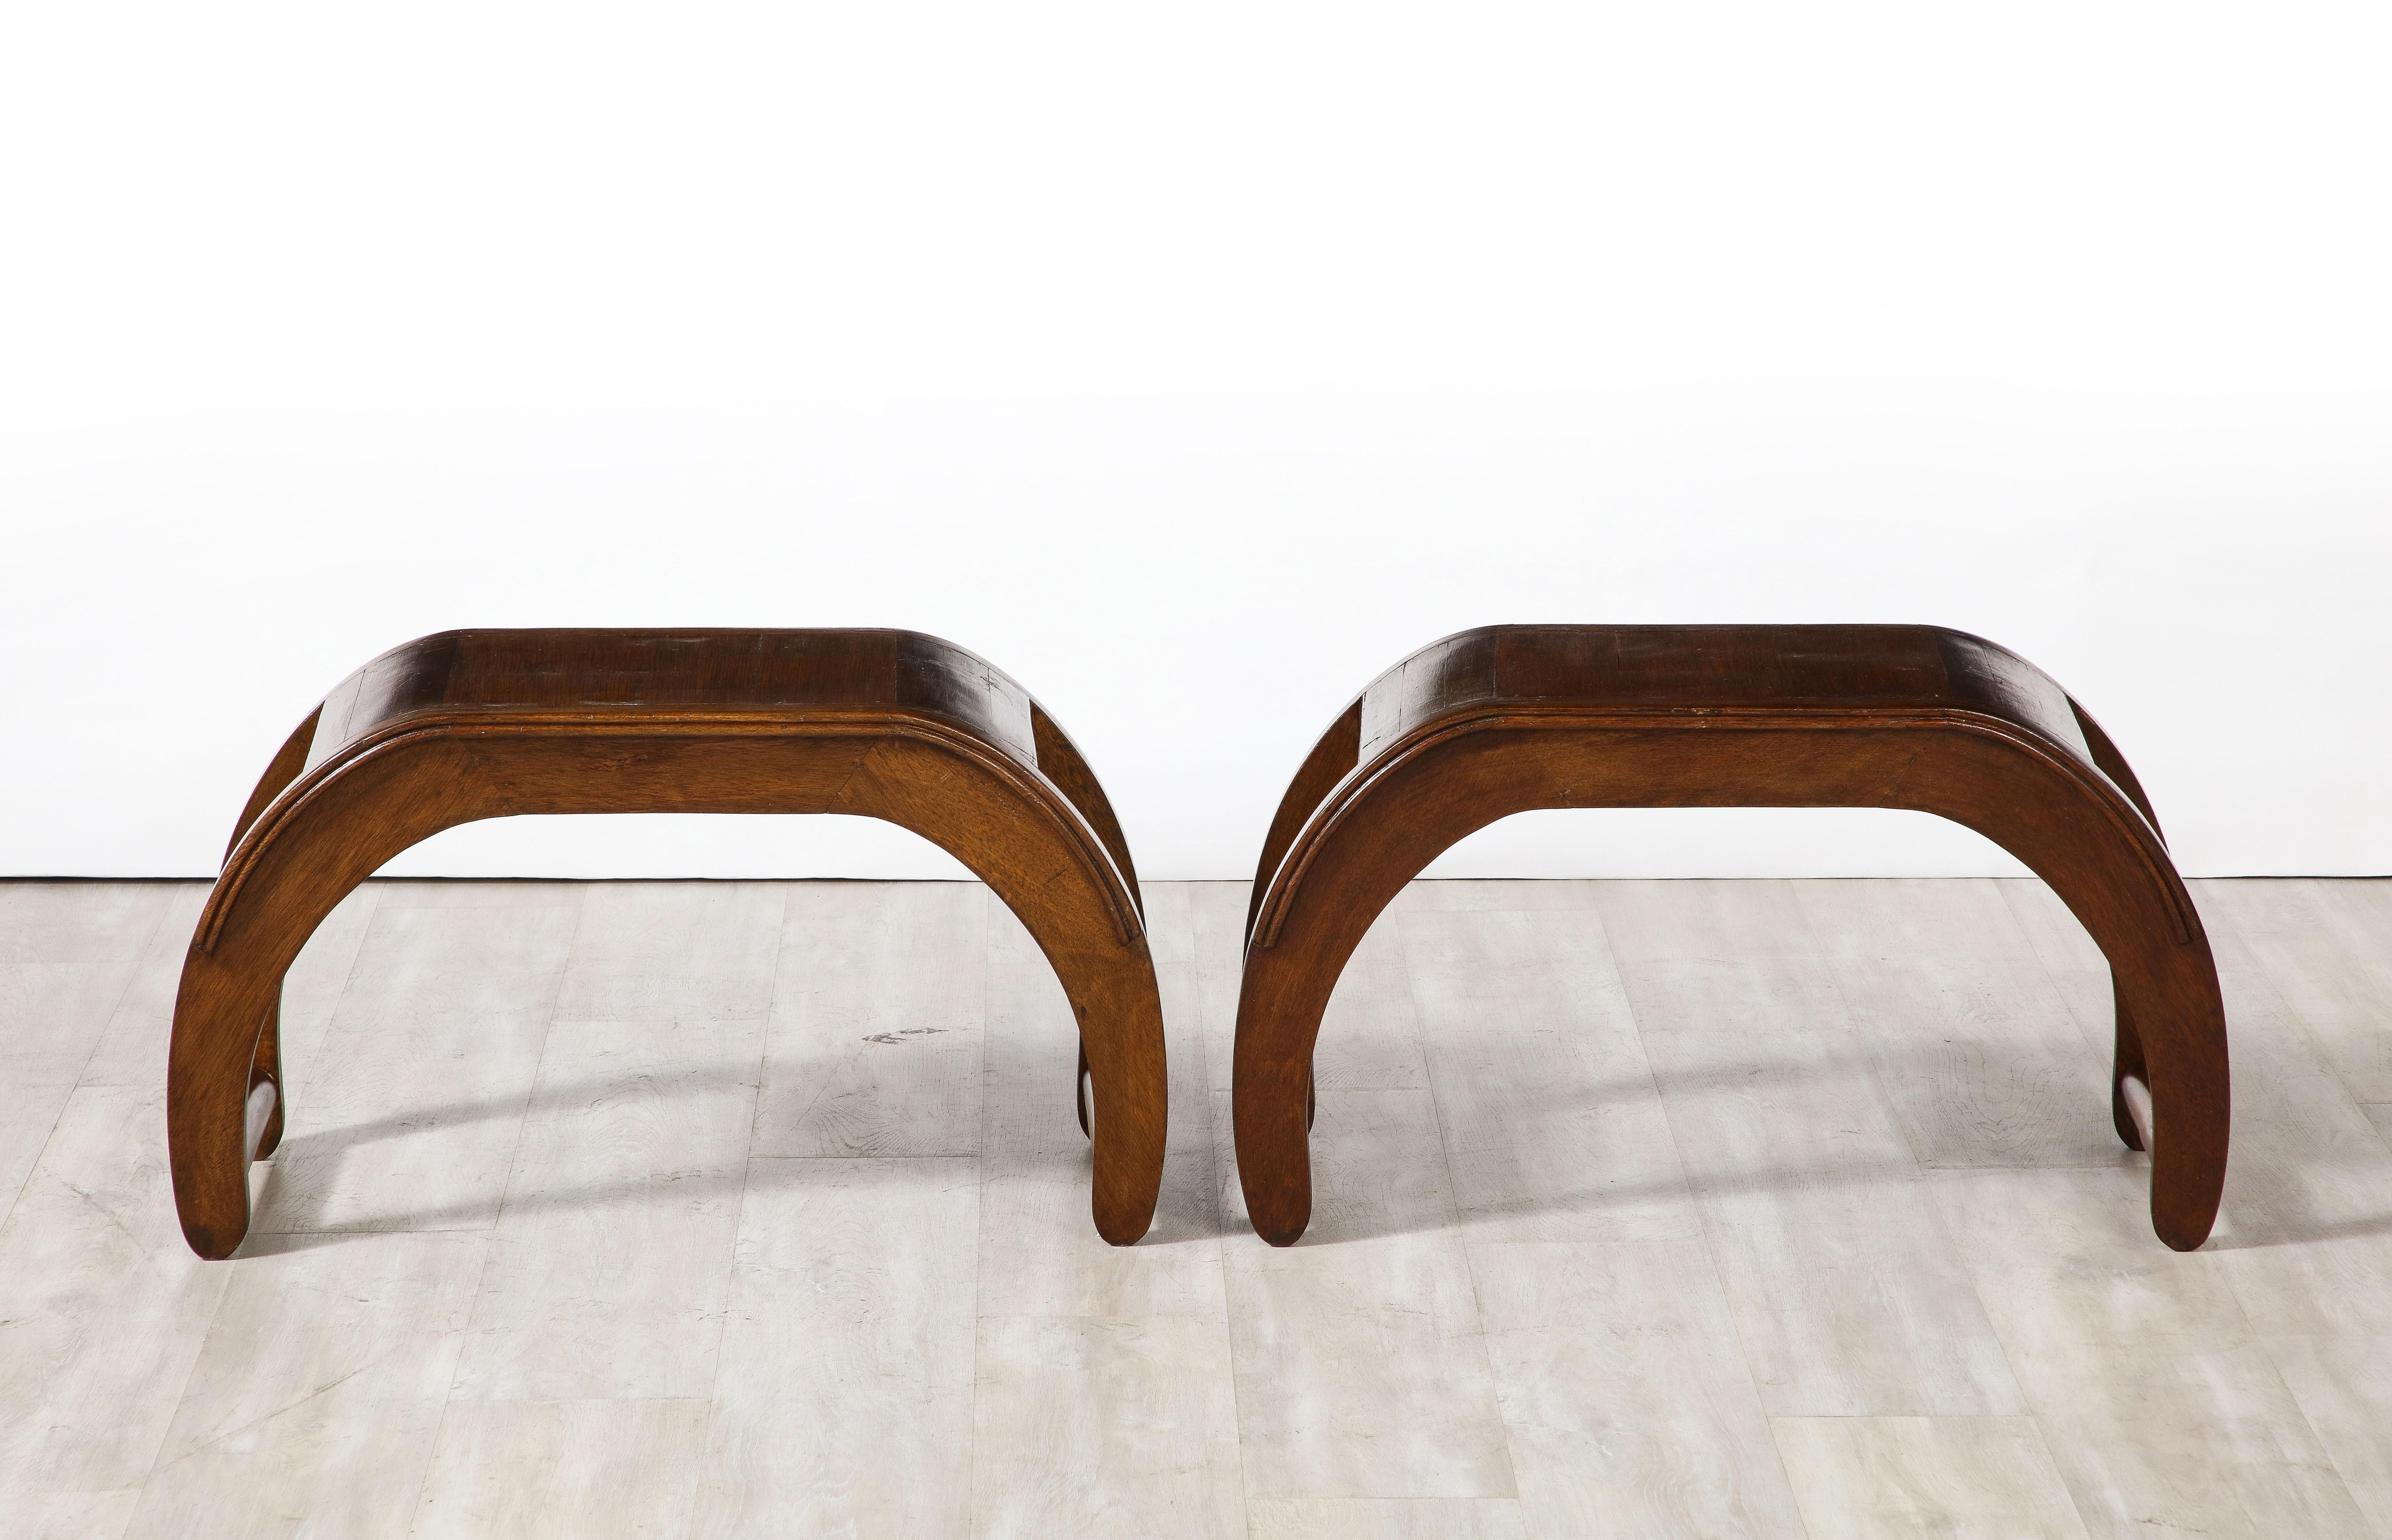 A pair of highly unique Italian walnut benches with a striking elliptical shape, the seat wide and comfortable and the base with turned stretchers connecting the legs. With an embossed metal mark with the initials GJ, the pair were likely custom